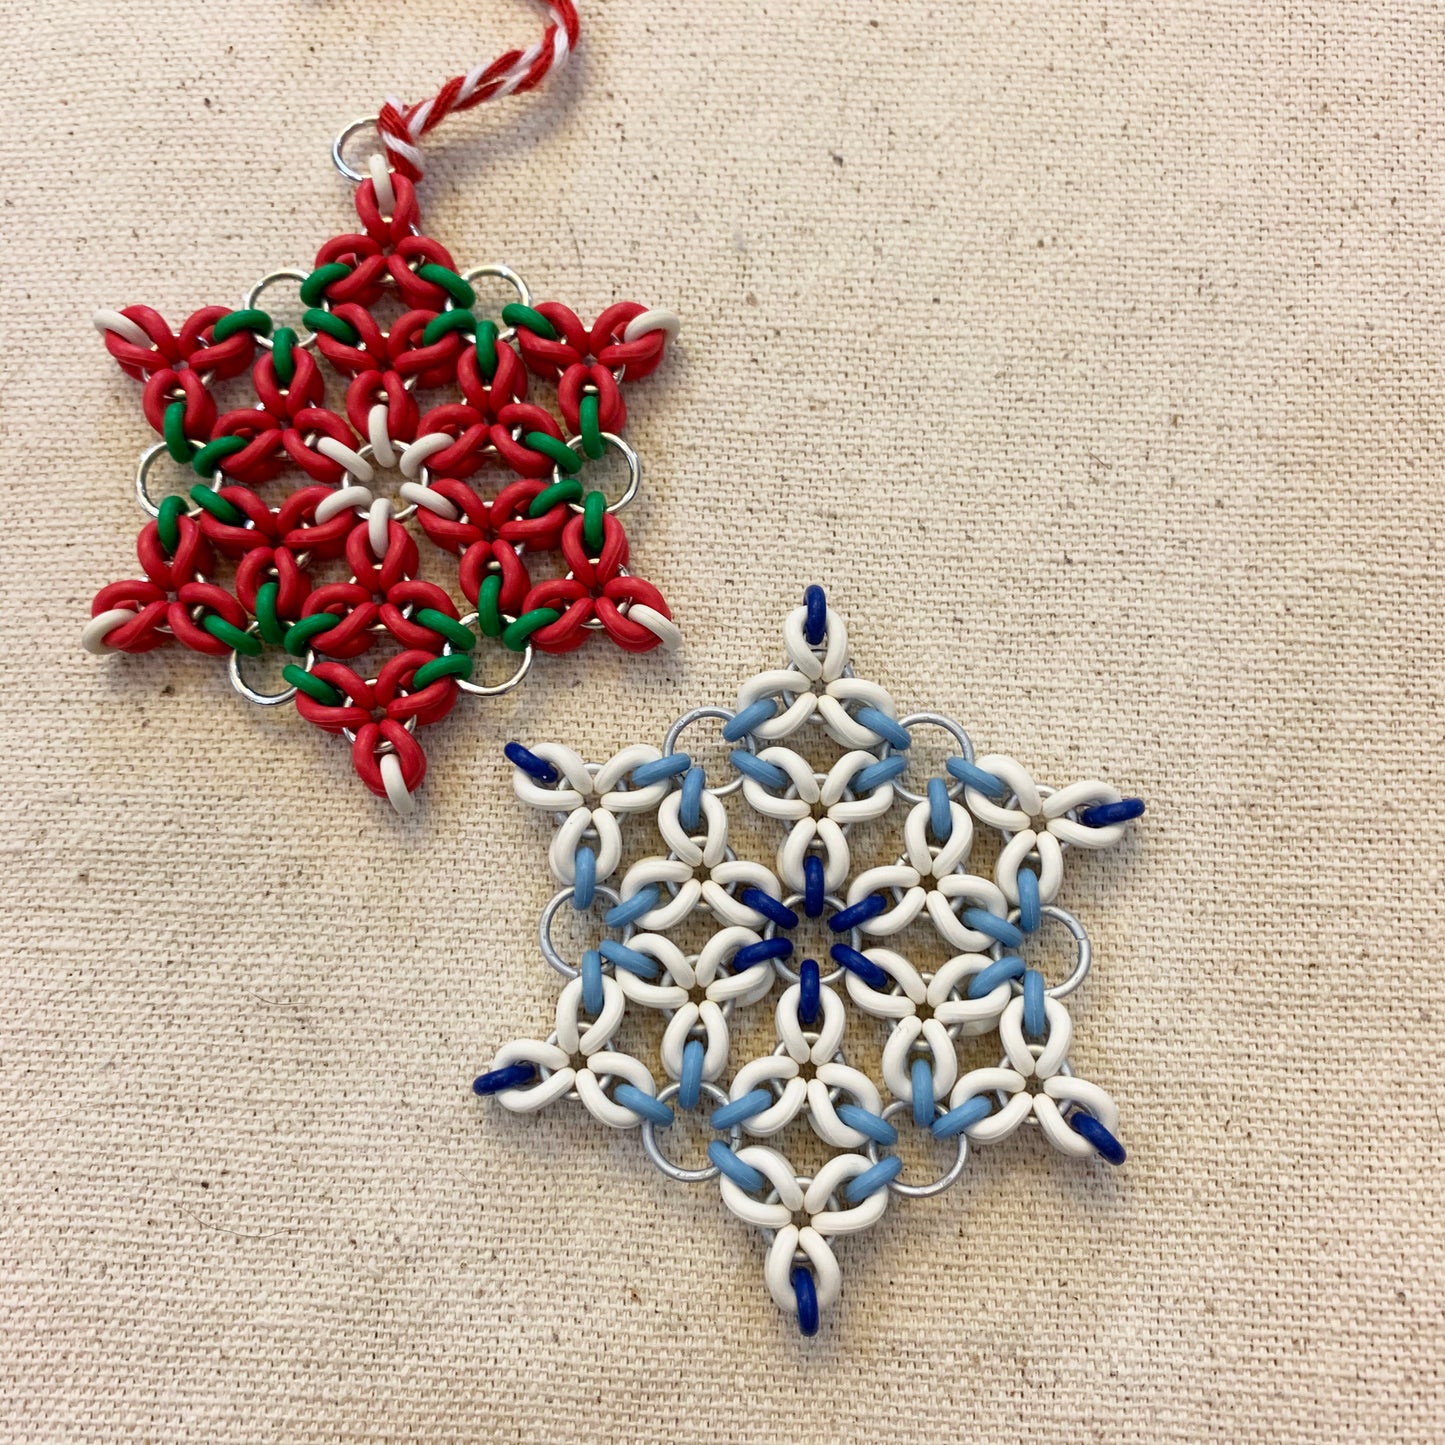 Snowflake Tri Flower Ornament Kit with FREE Video - White with Celestial and Powder Blue